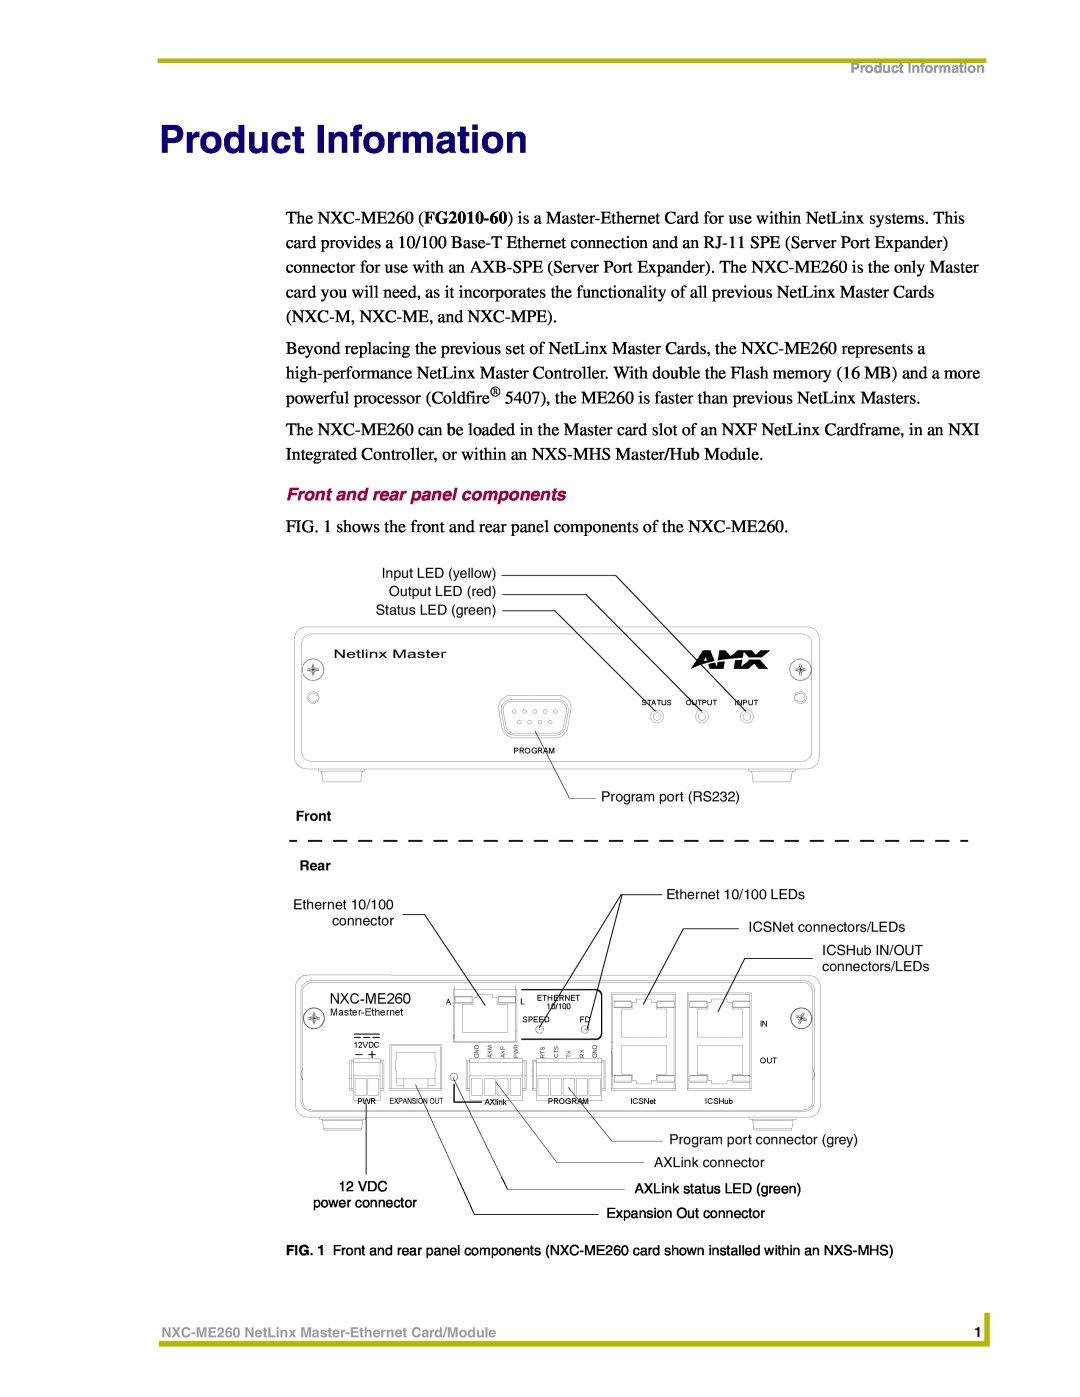 AMX NXC-ME260 instruction manual Product Information, Front and rear panel components 